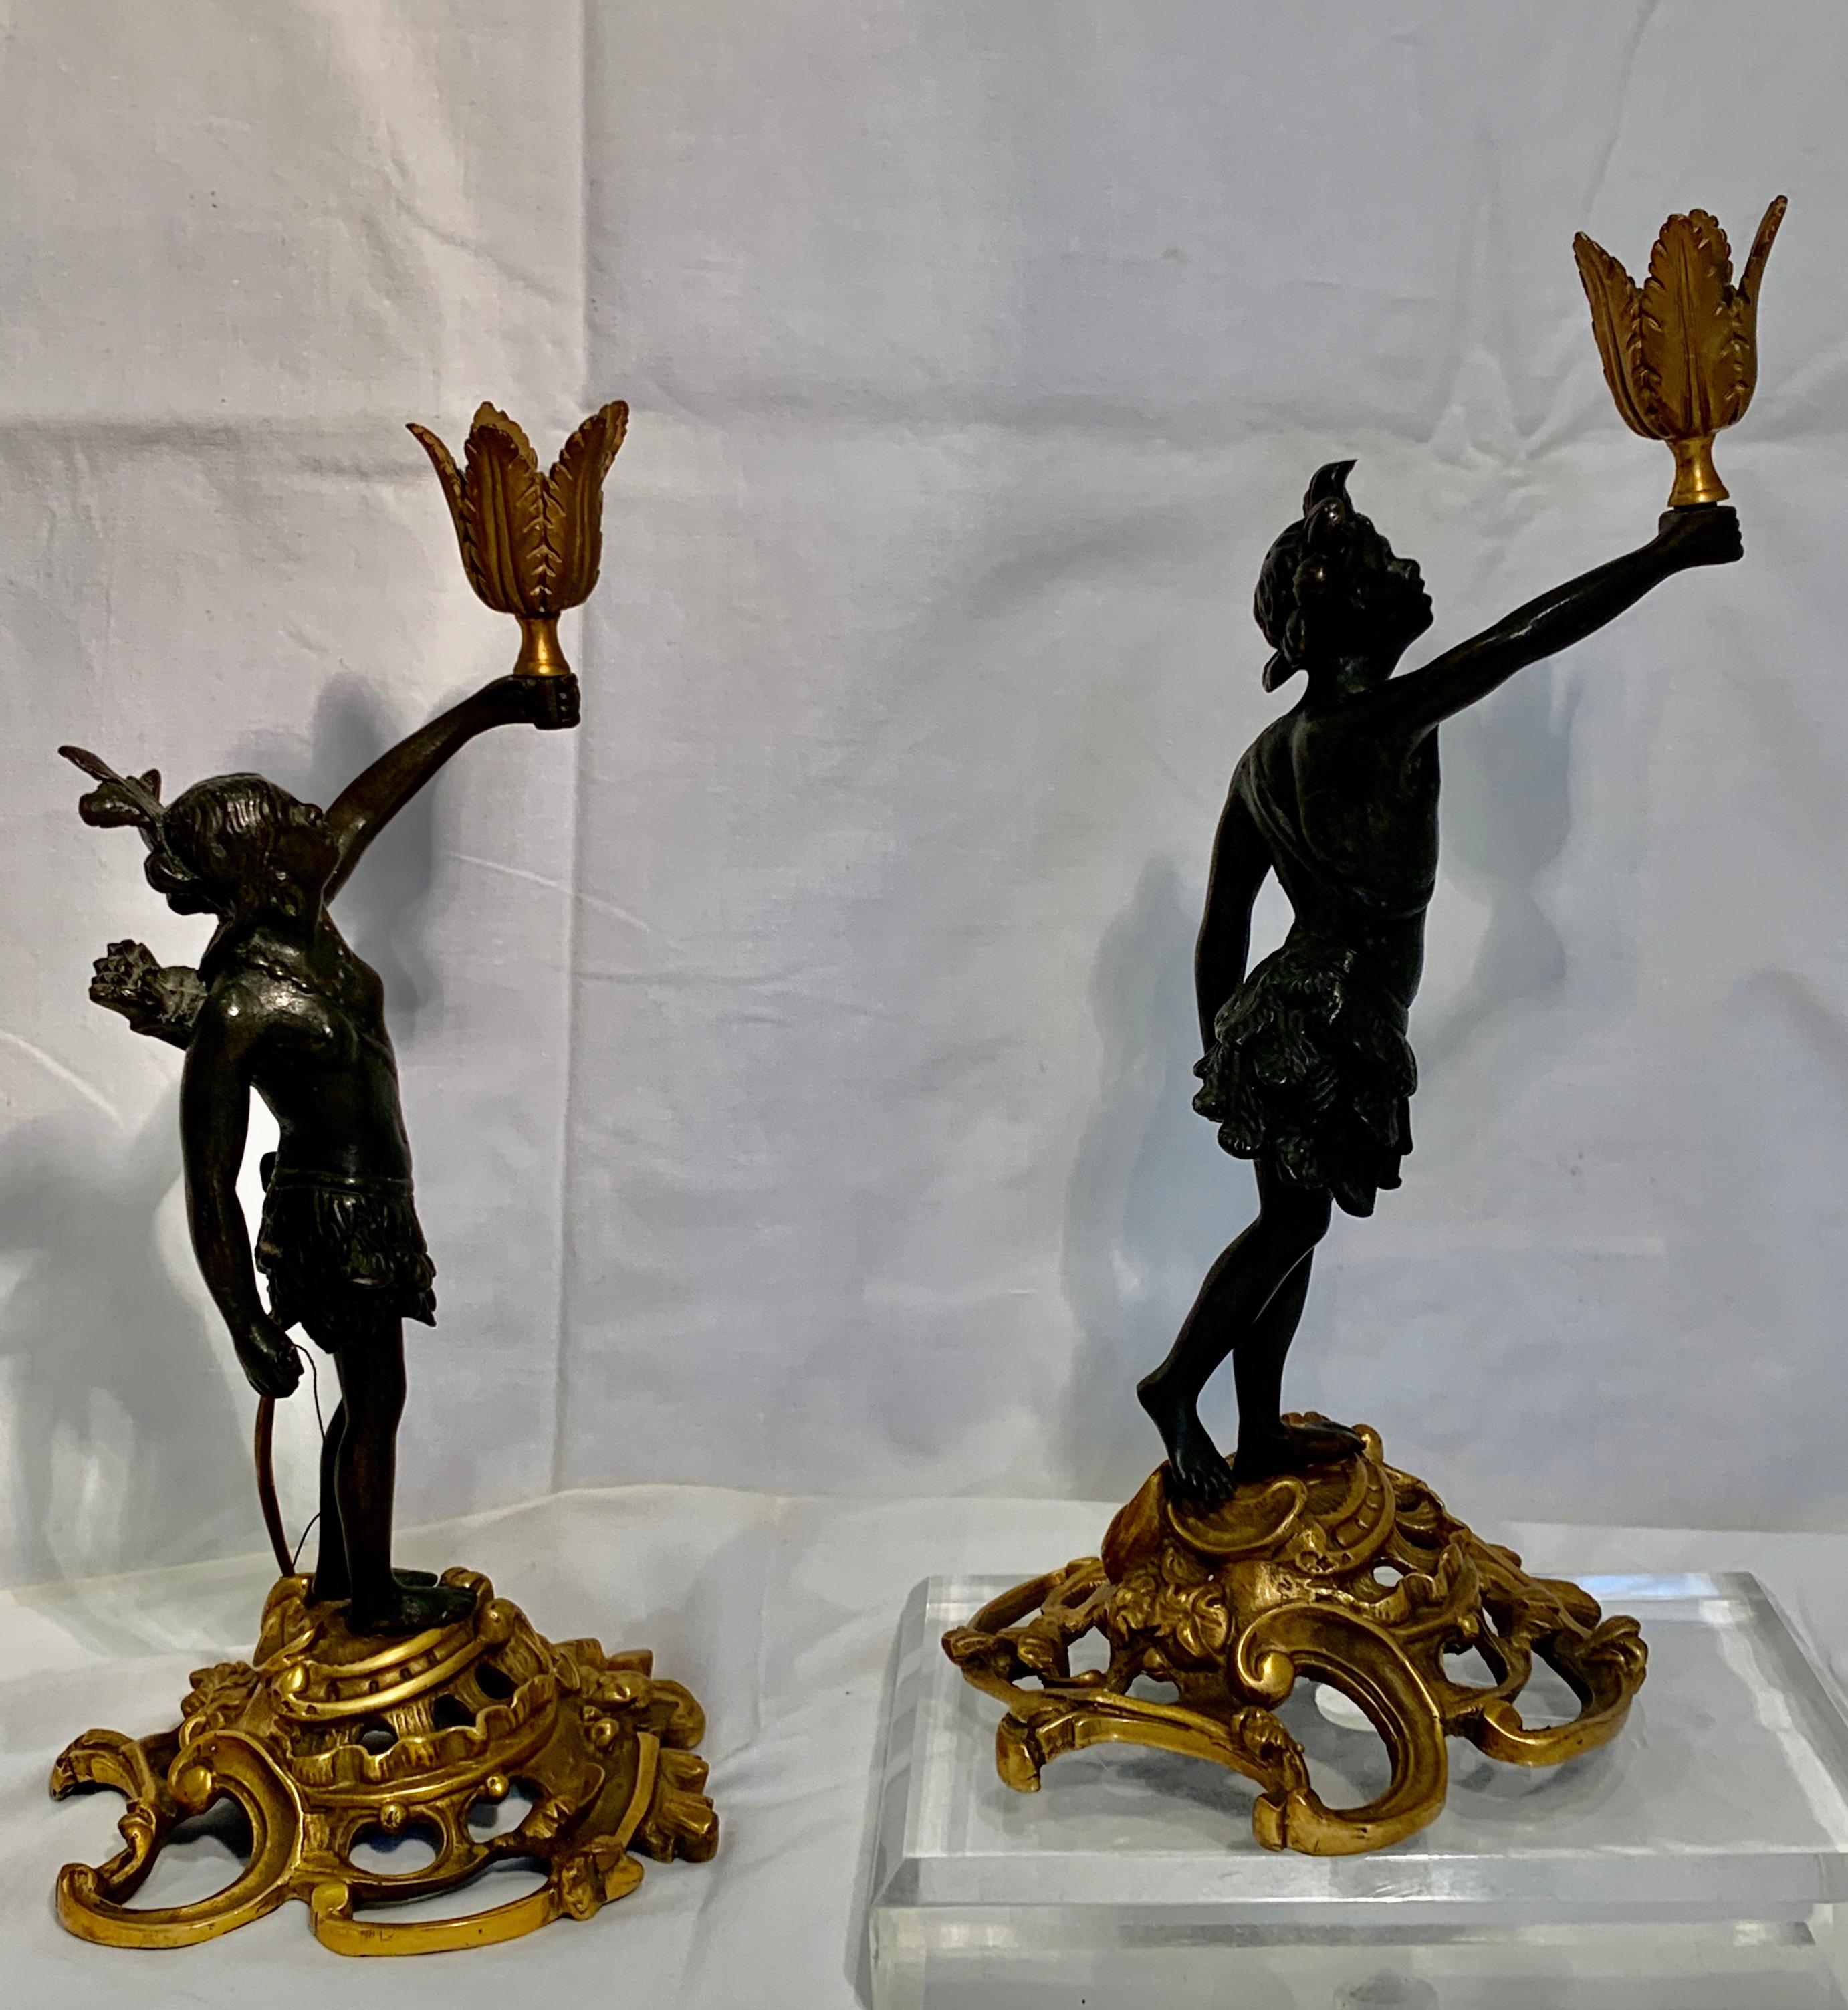 A very good quality patinated cast iron pair of candlesticks of Semi clad figures, with ormolu bases possibly of Russian origin
The size is 10 in (25.3 cm) High
Measurements.